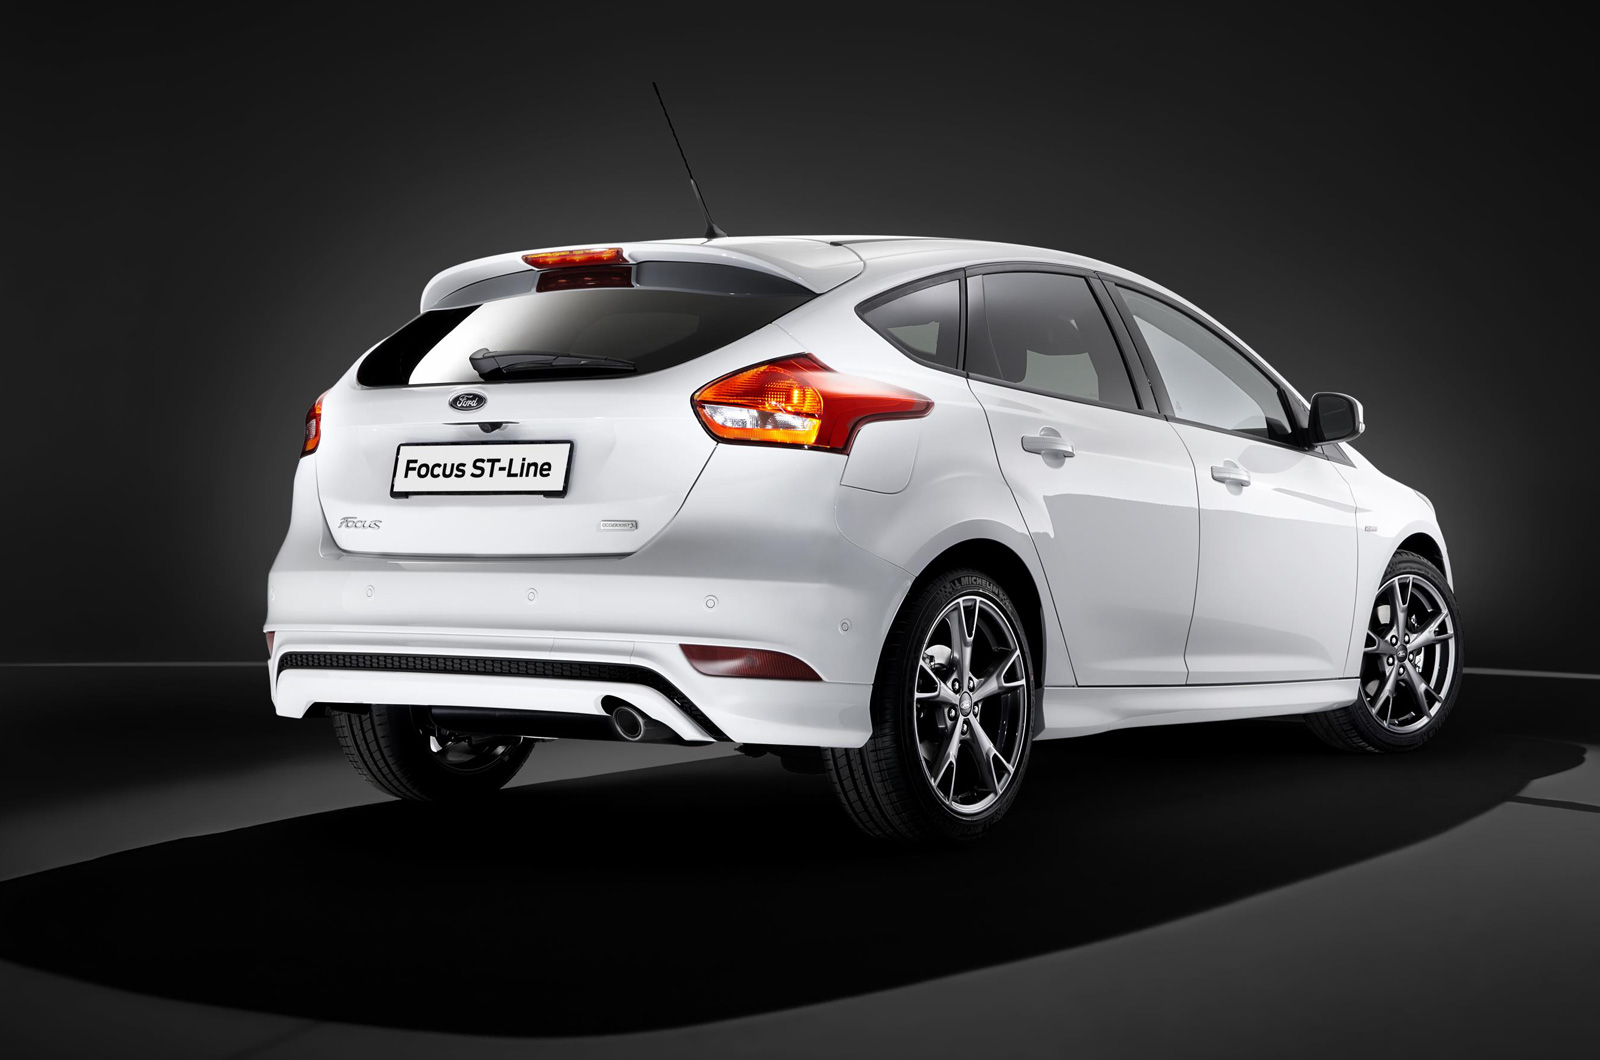 Ford ST-Line range launched for Fiesta and Focus